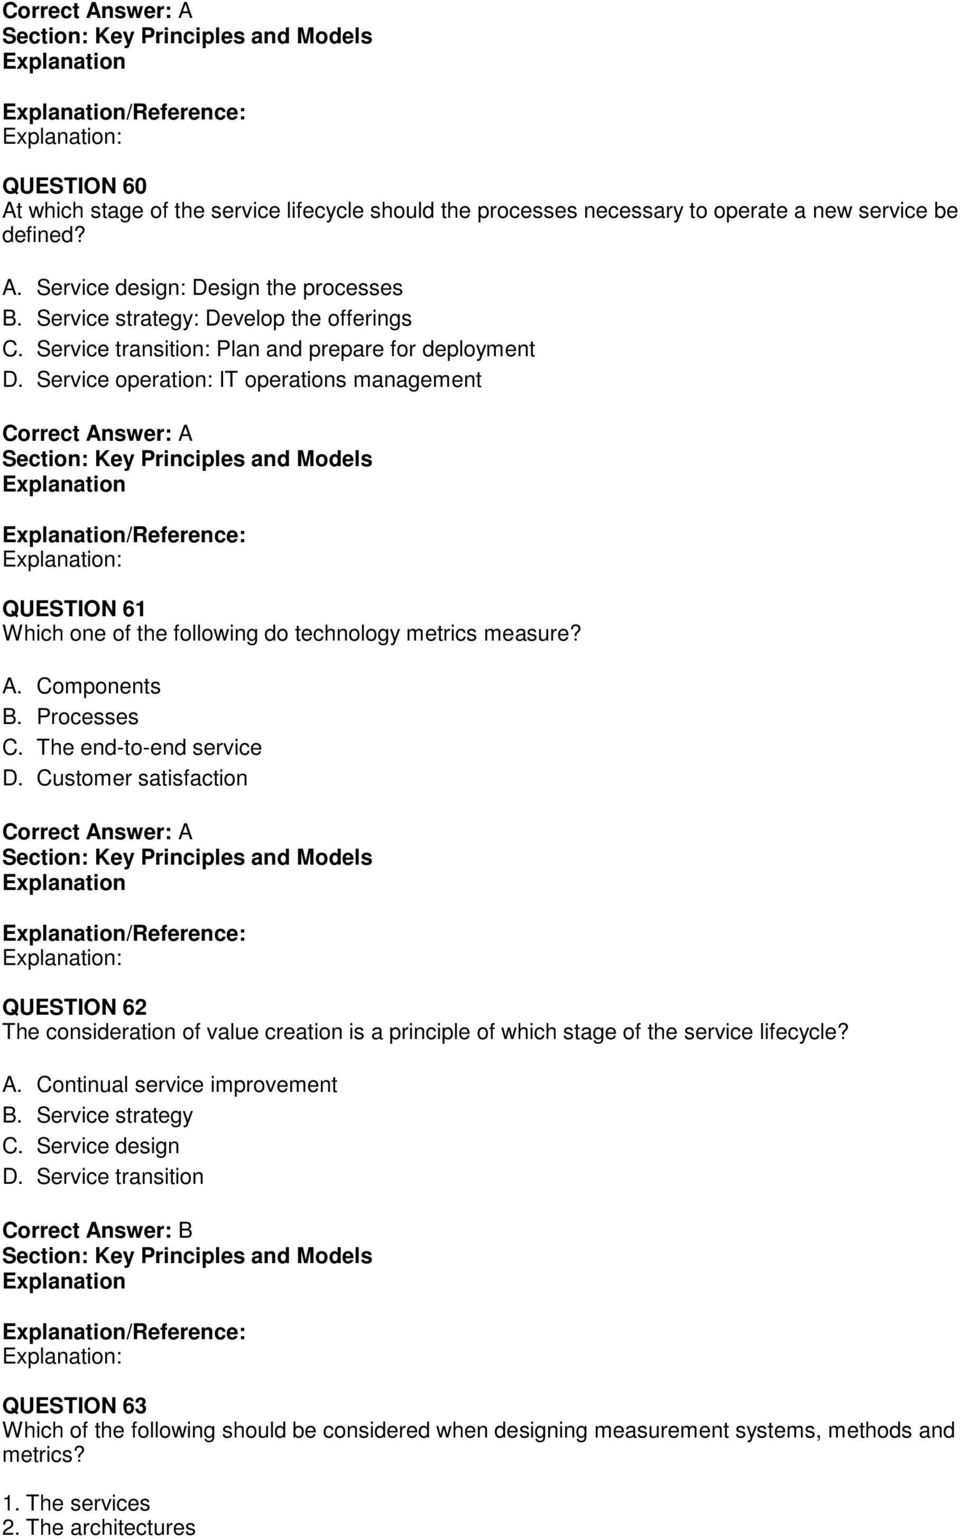 Service operation: IT operations management Section: Key Principles and Models /Reference: : QUESTION 61 Which one of the following do technology metrics measure? A. Components B. Processes C.